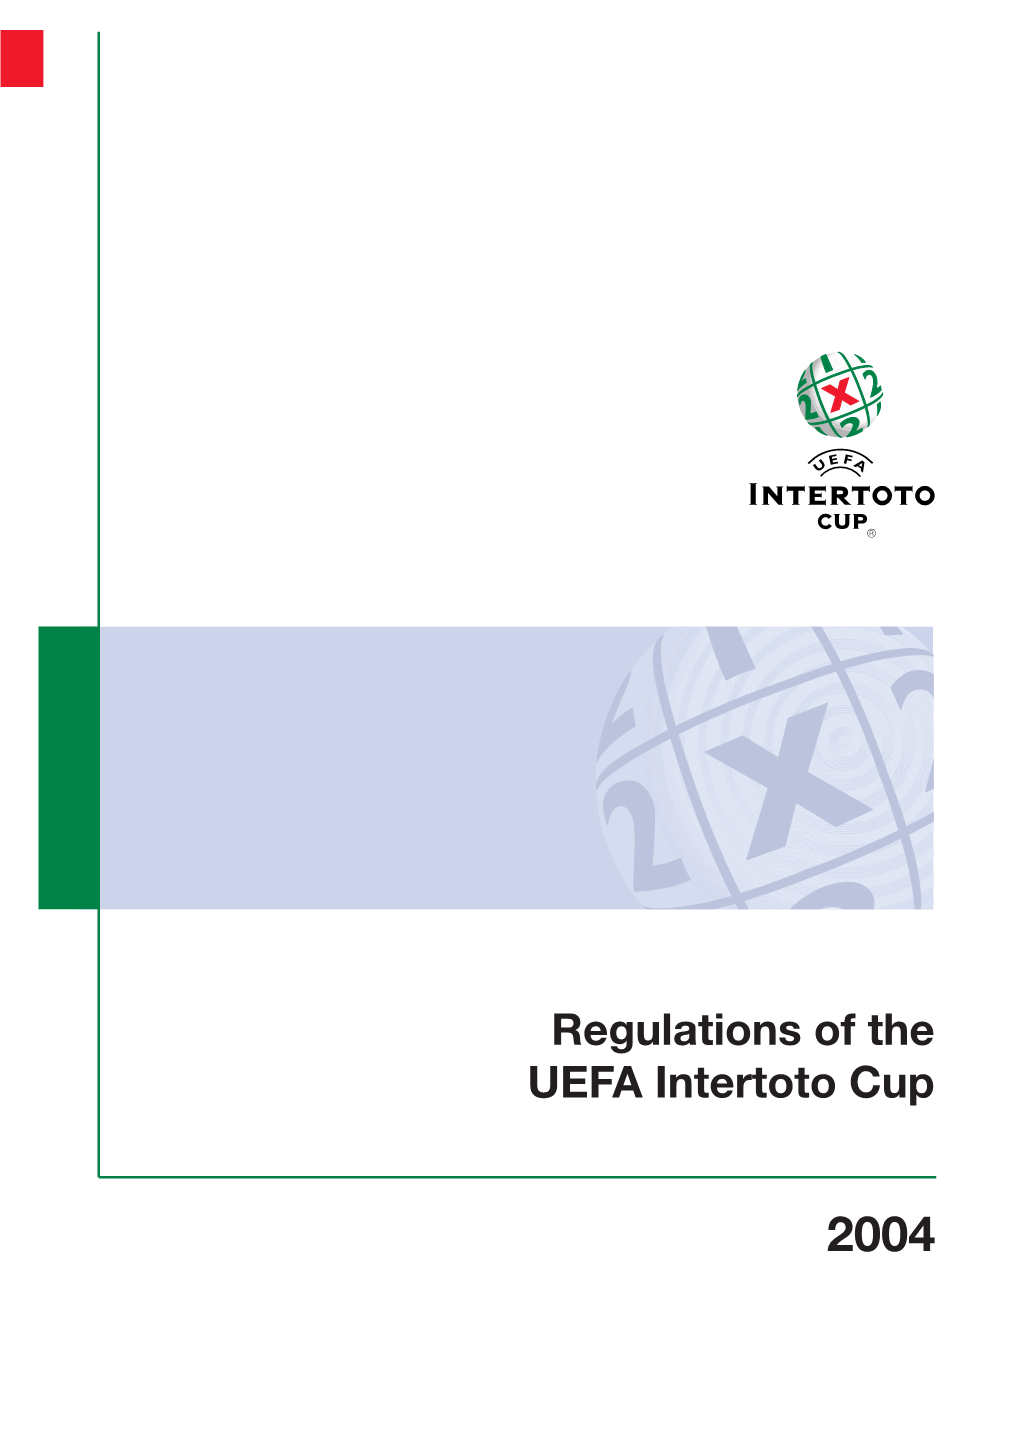 Regulations of the UEFA Intertoto Cup CONTENTS